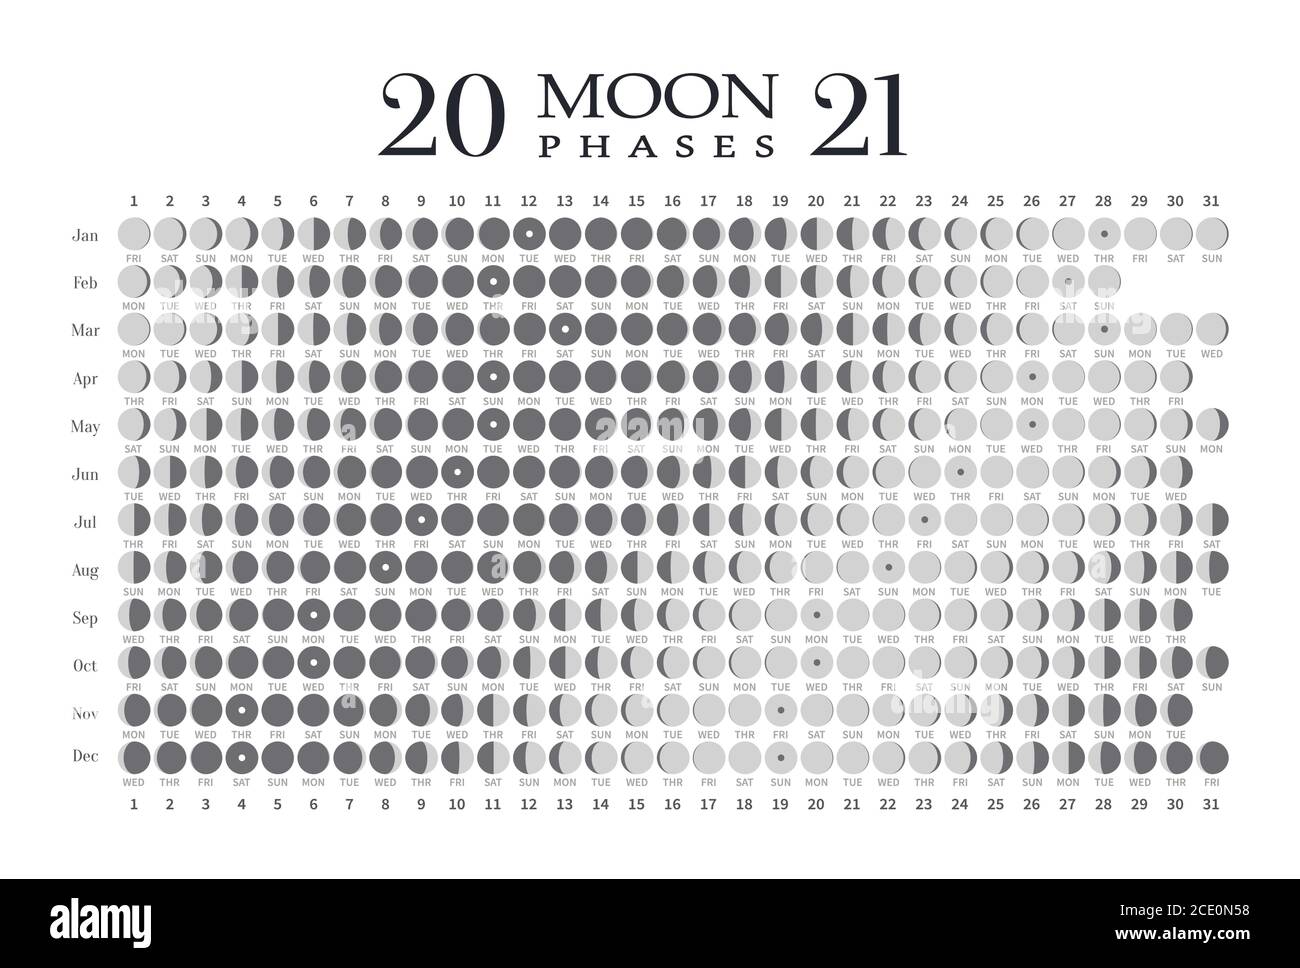 2021 moon phases calendar on white background. Astronomy vector chart